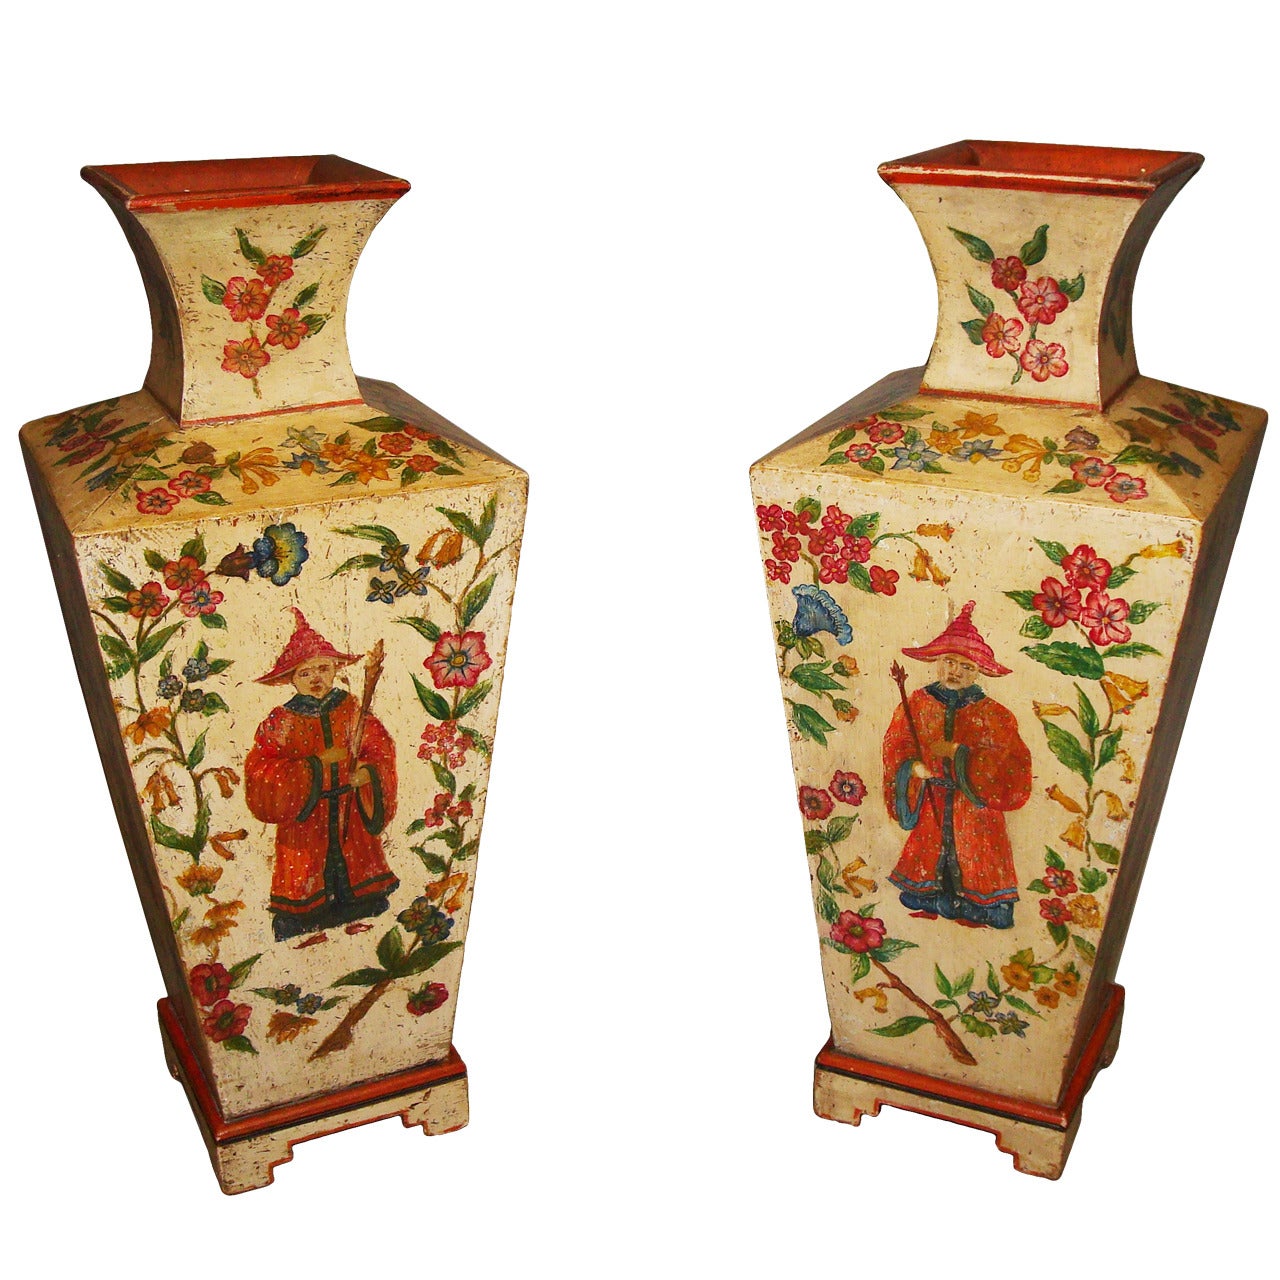 Early 20th century Decorative Pair of Large Painted Pine Vases For Sale